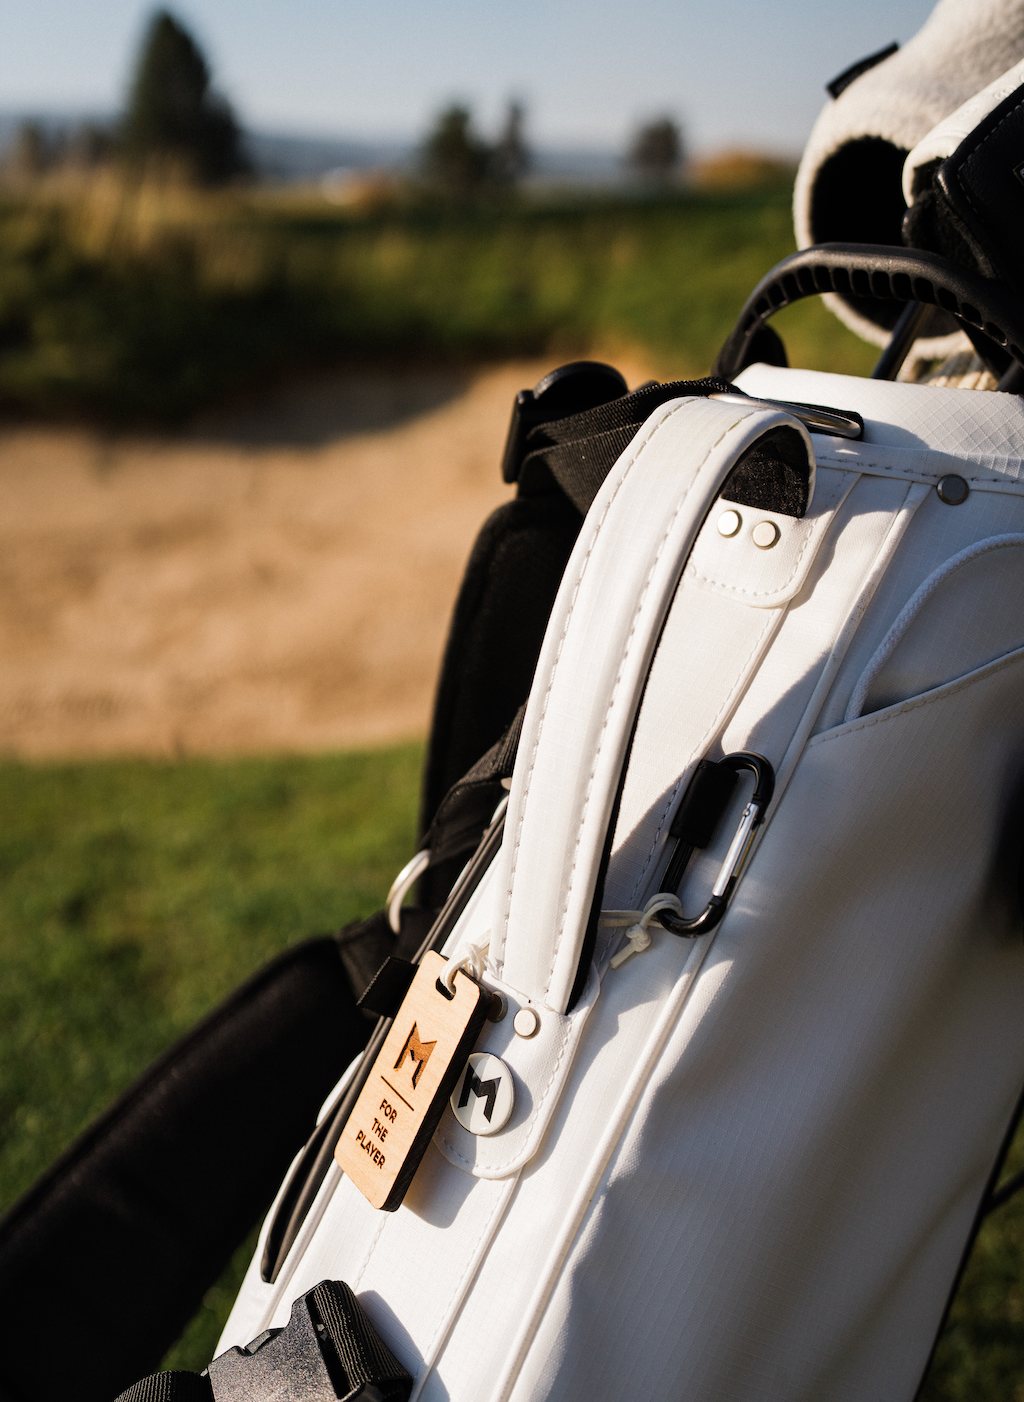 the mnml golf mr1 custom golf bag is made from 100% recycled material, and is more durable than ever.